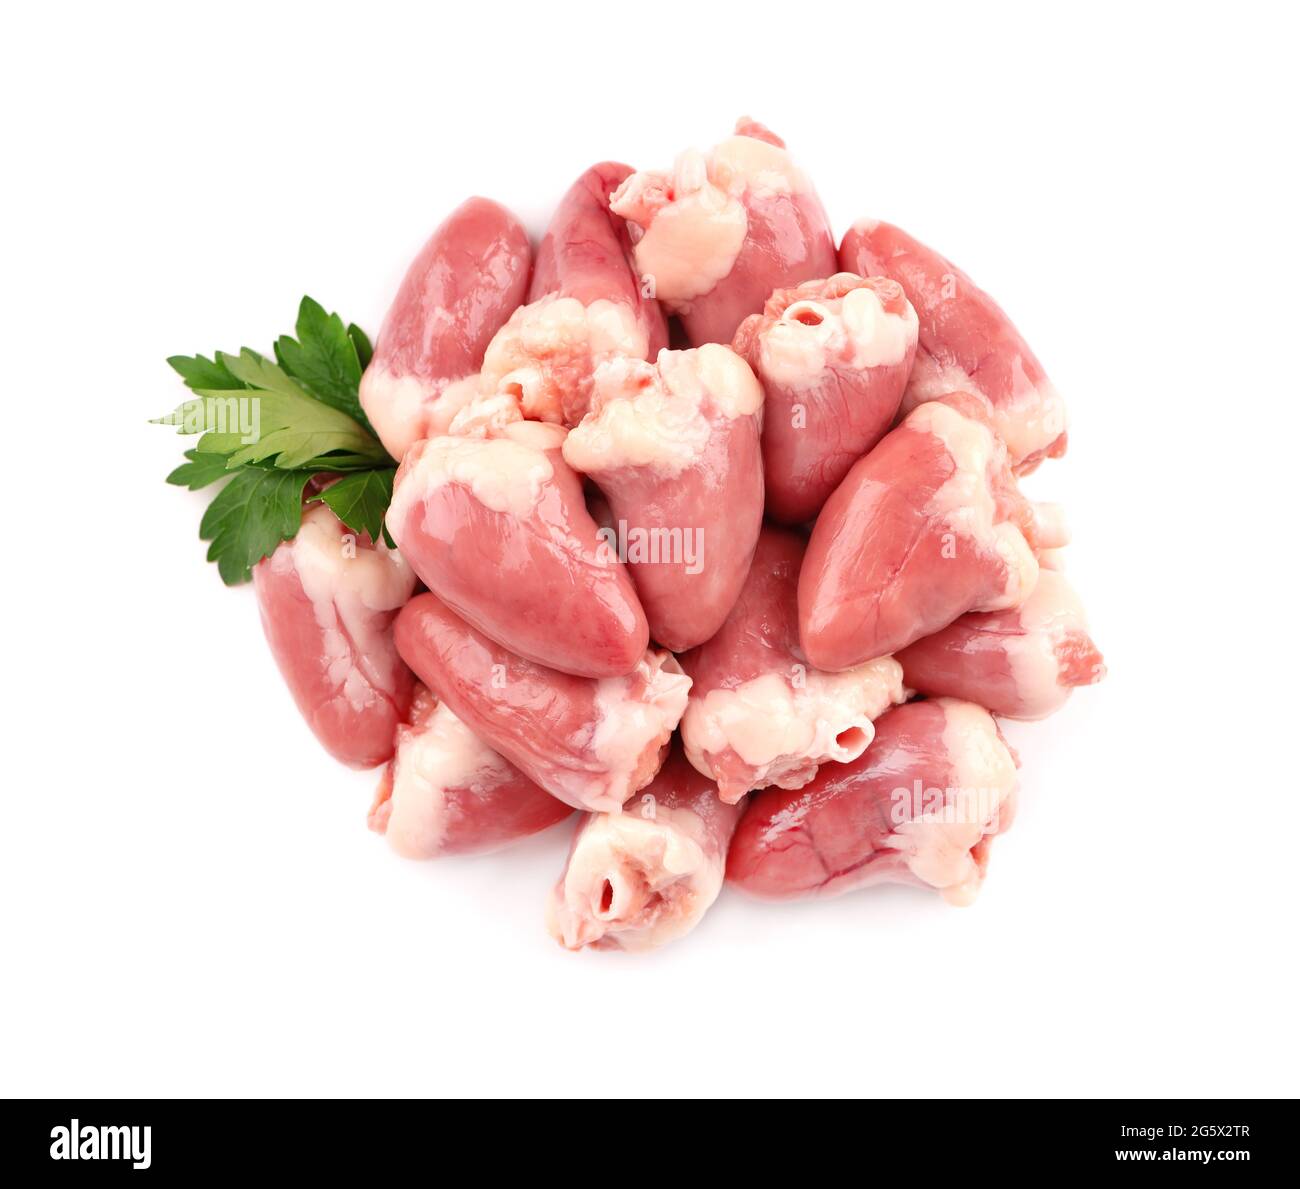 Chicken hearts raw isolated on white background. Fresh chicken broiler hearts with parsley leaves. Top view. Stock Photo